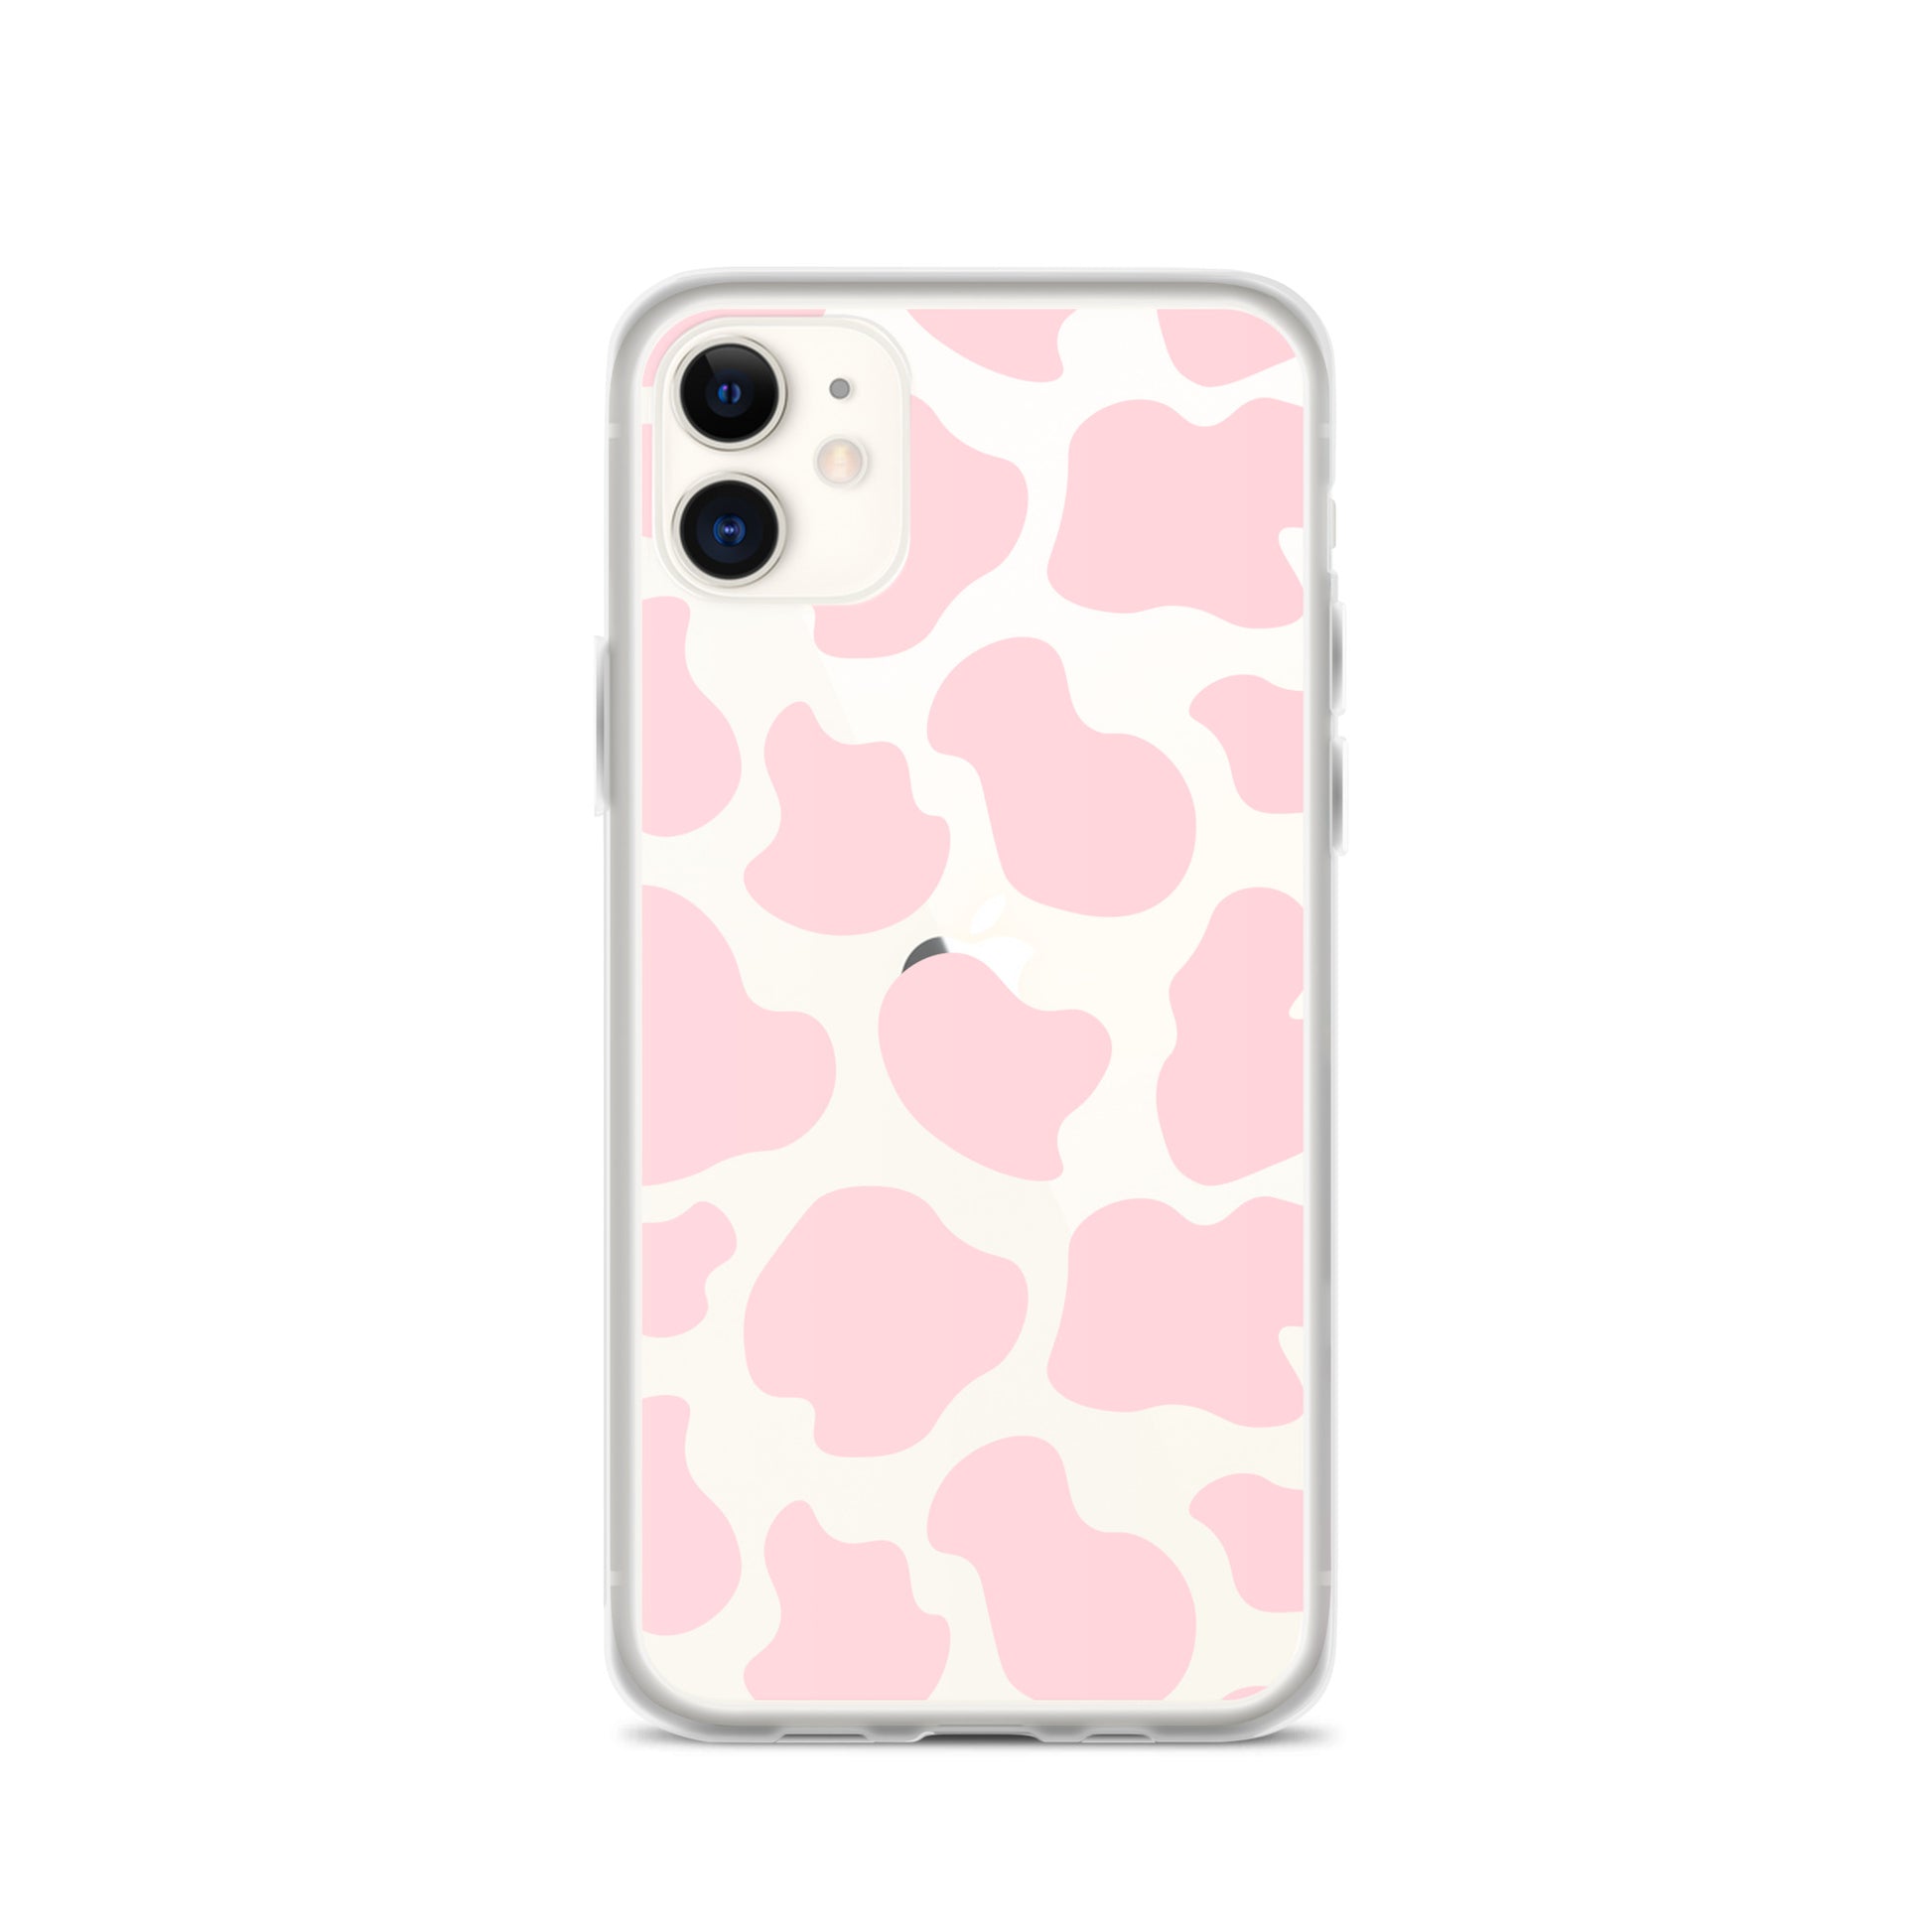 Pink Cow Clear iPhone Case iPhone 11